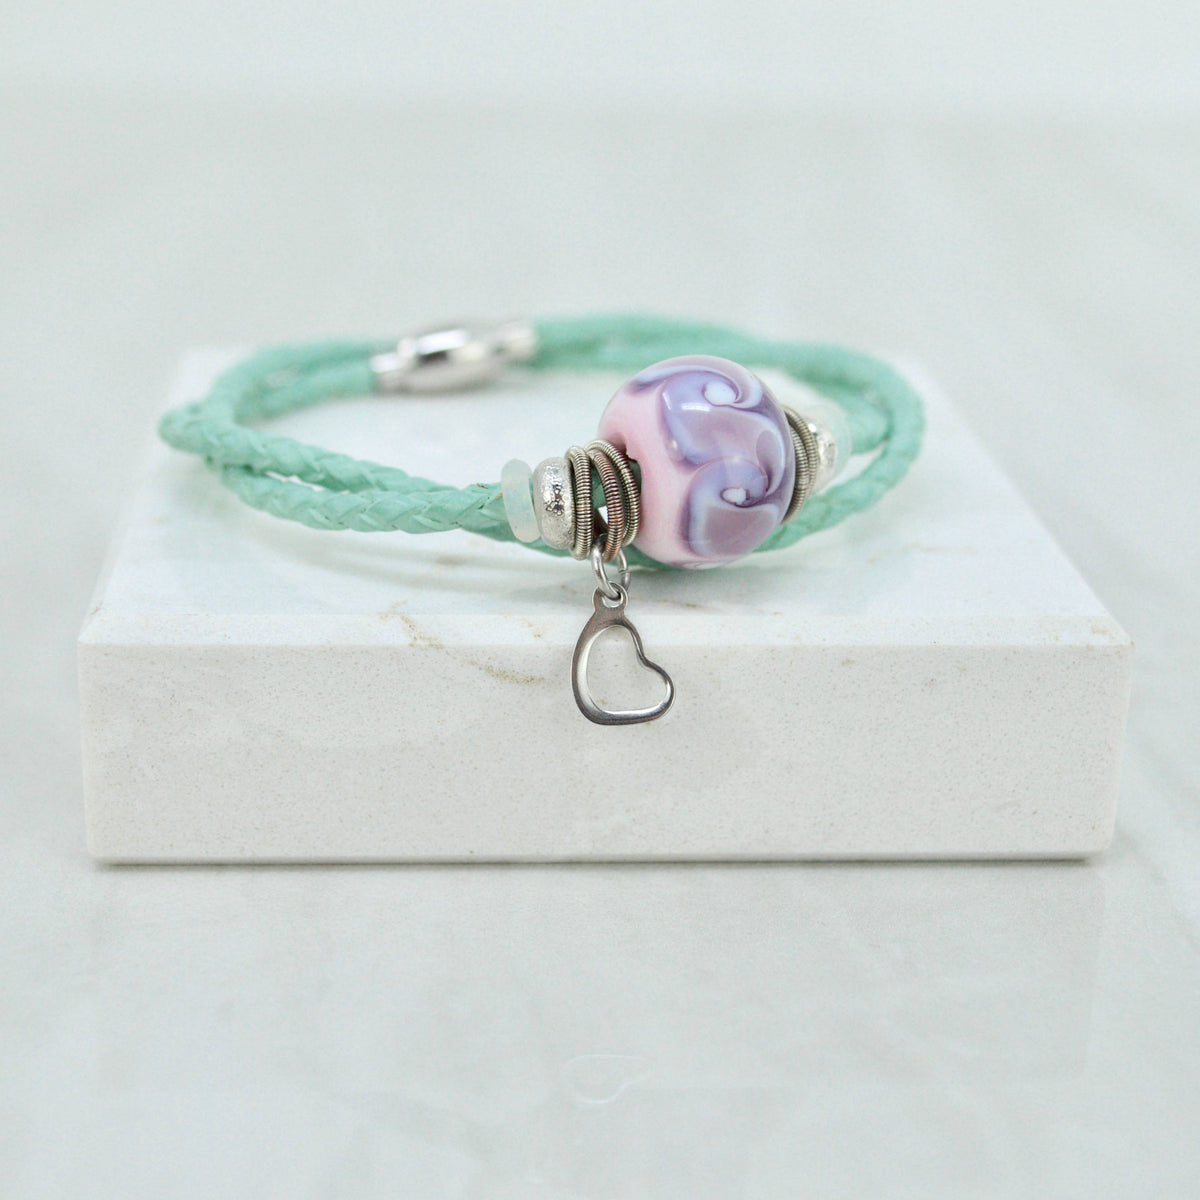 Murano Glass Bead Bracelet With Charm, Leather Band, Sage Green, Made In Italy - My Italian Decor